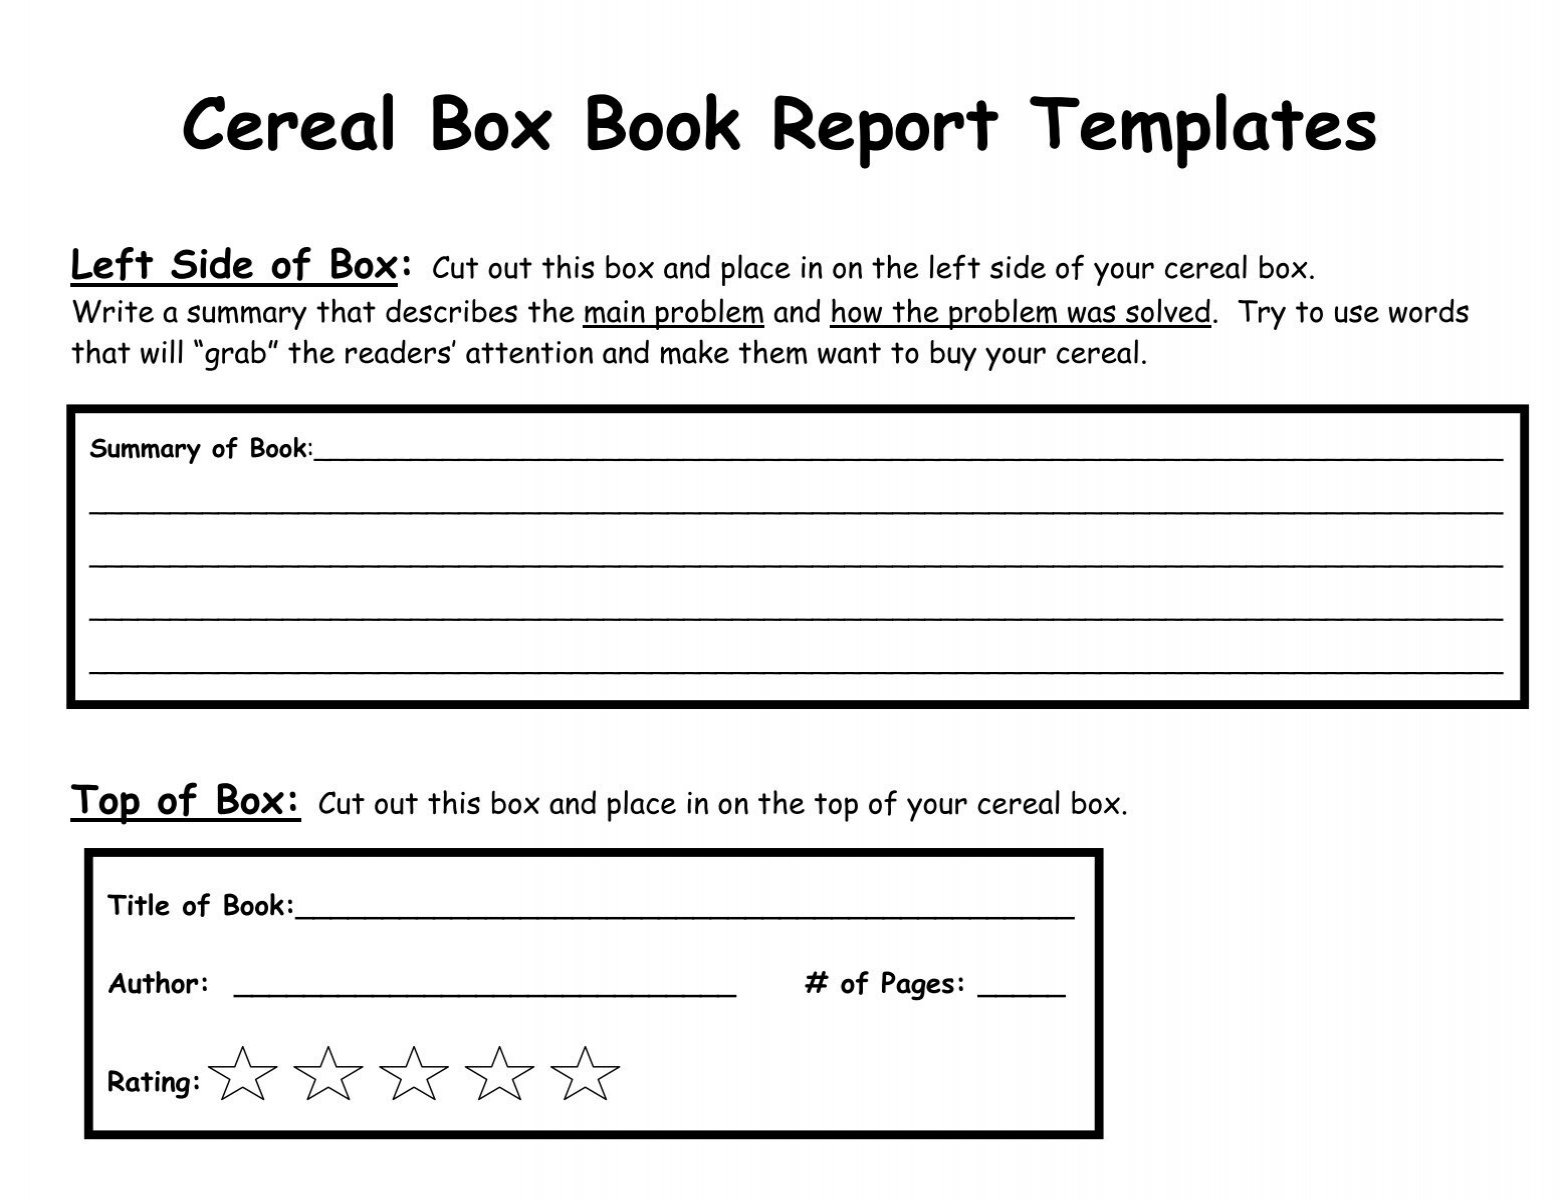 cereal box book report nutrition facts